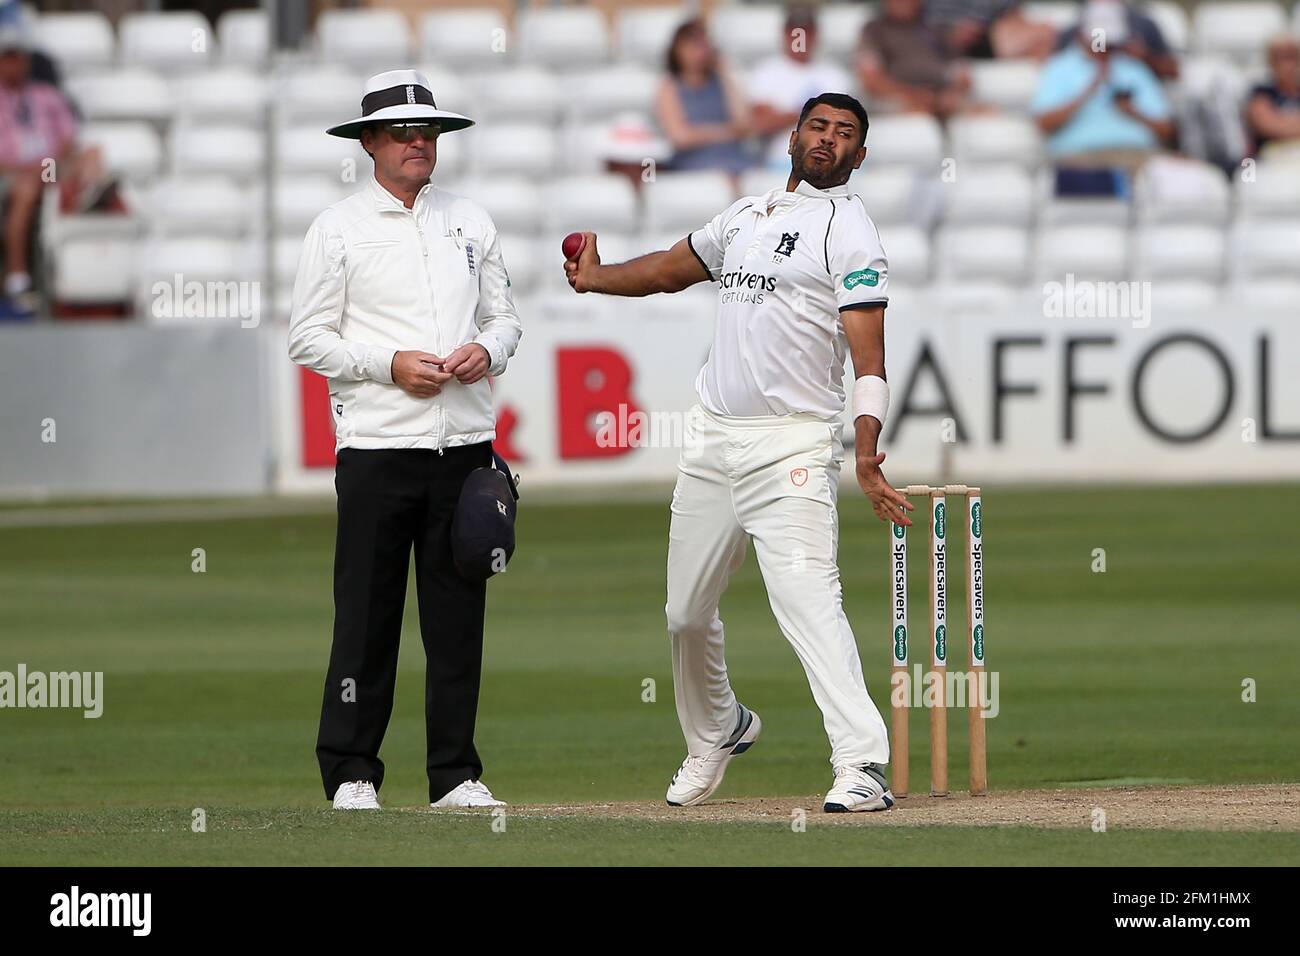 Jeetan Patel in bowling action for Warwickshire during Essex CCC vs Warwickshire CCC, Specsavers County Championship Division 1 Cricket at The Cloudfm Stock Photo